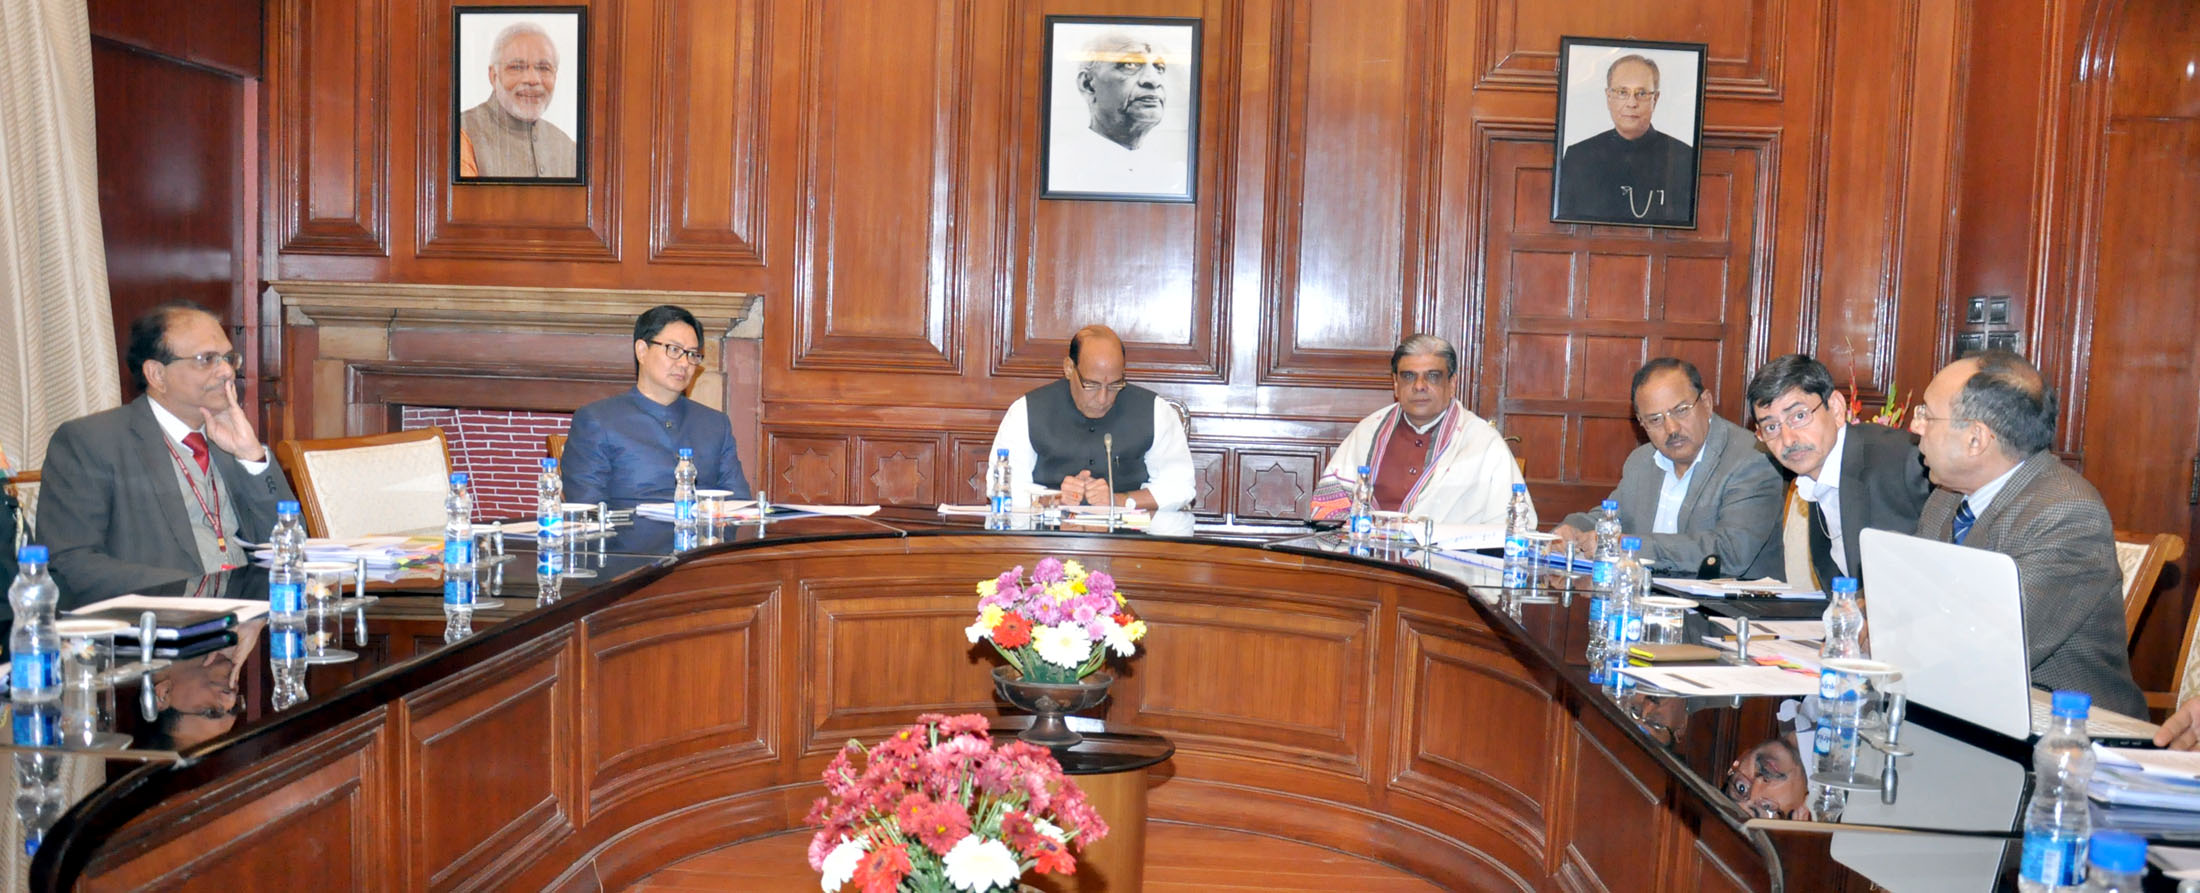 The Union Home Minister, Shri Rajnath Singh chairing a meeting on effective policing along border areas of North east, in New Delhi on December 29, 2015. 	The Minister of State for Home Affairs, Shri Haribhai Parthibhai Chaudhary, the Minister of State for Home Affairs, Shri Kiren Rijiju and other senior officers are also seen.